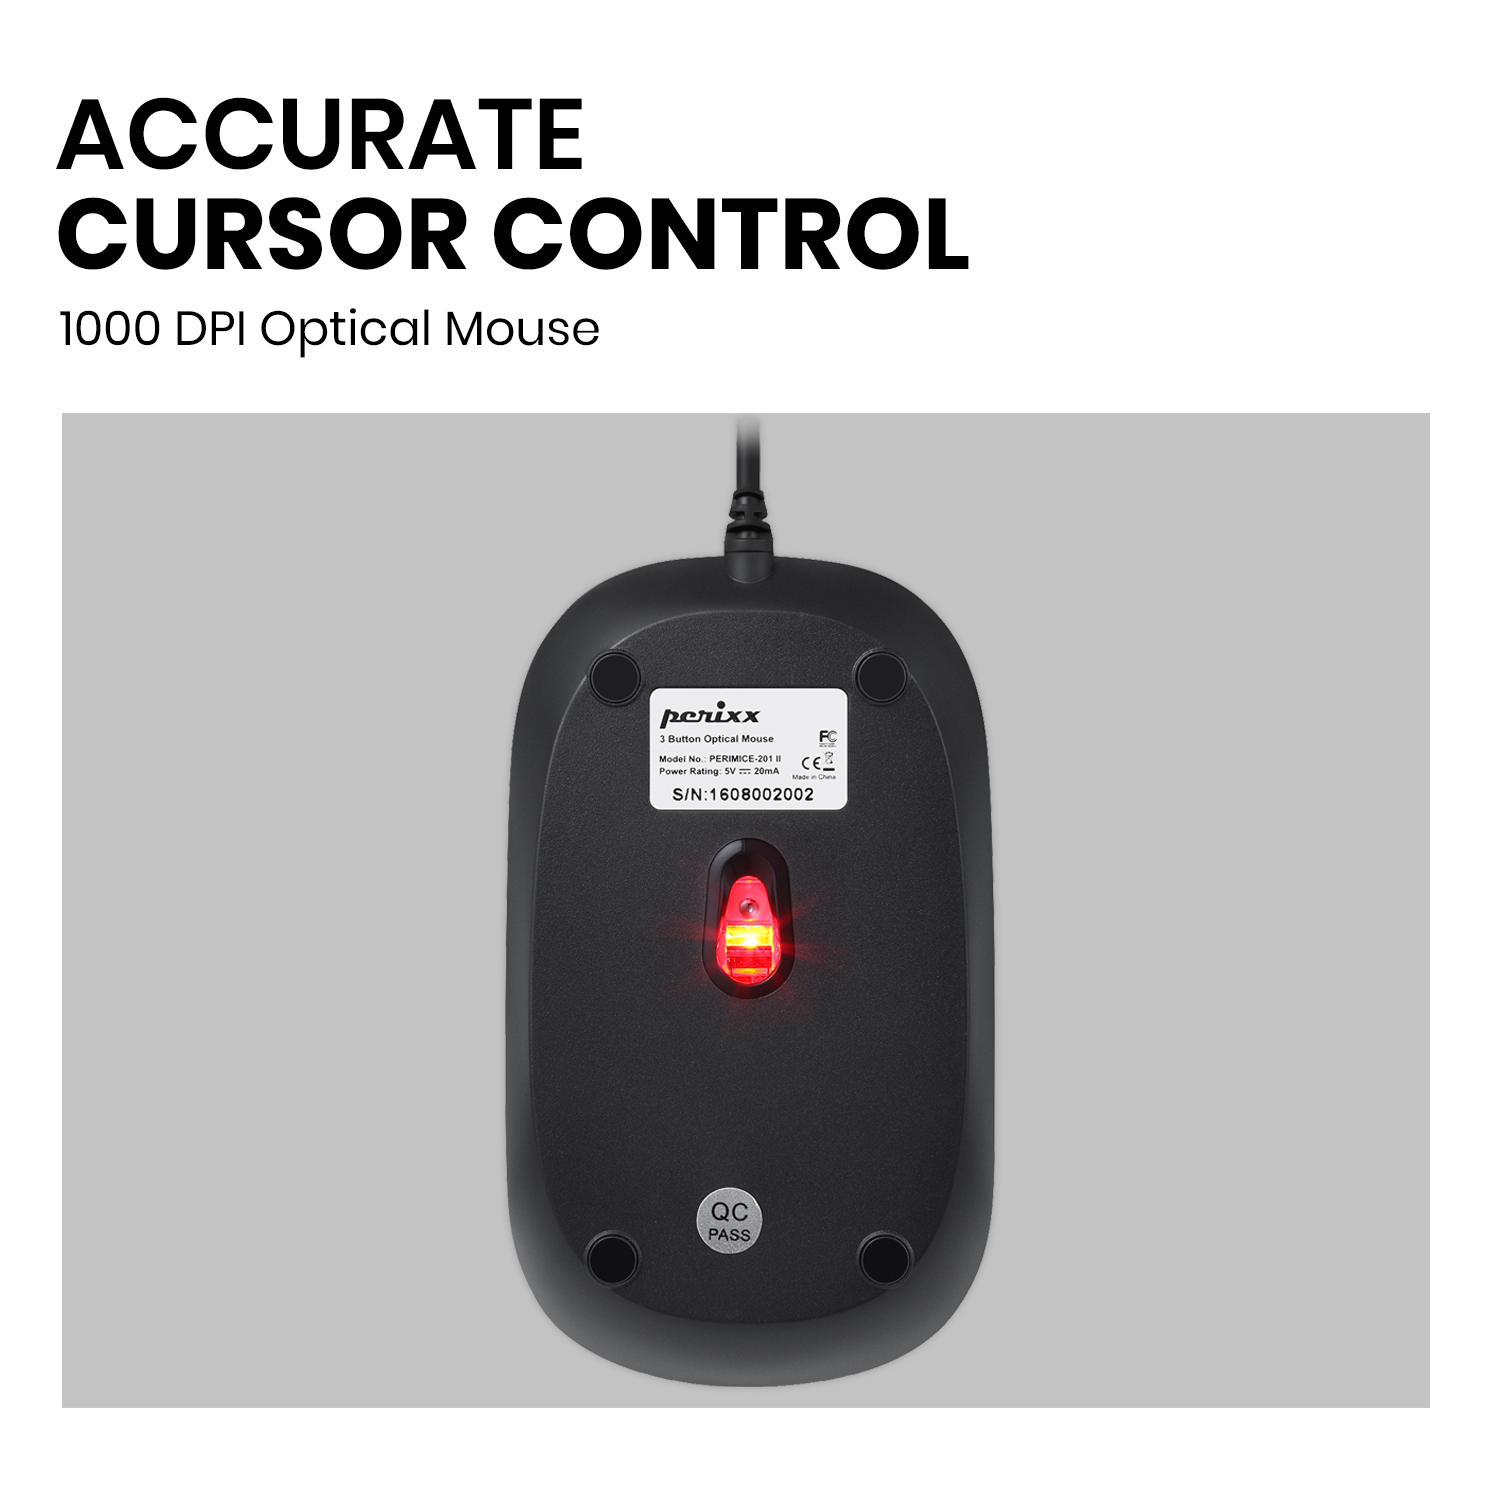 SMOOTH AND ACCURATE CONTROL